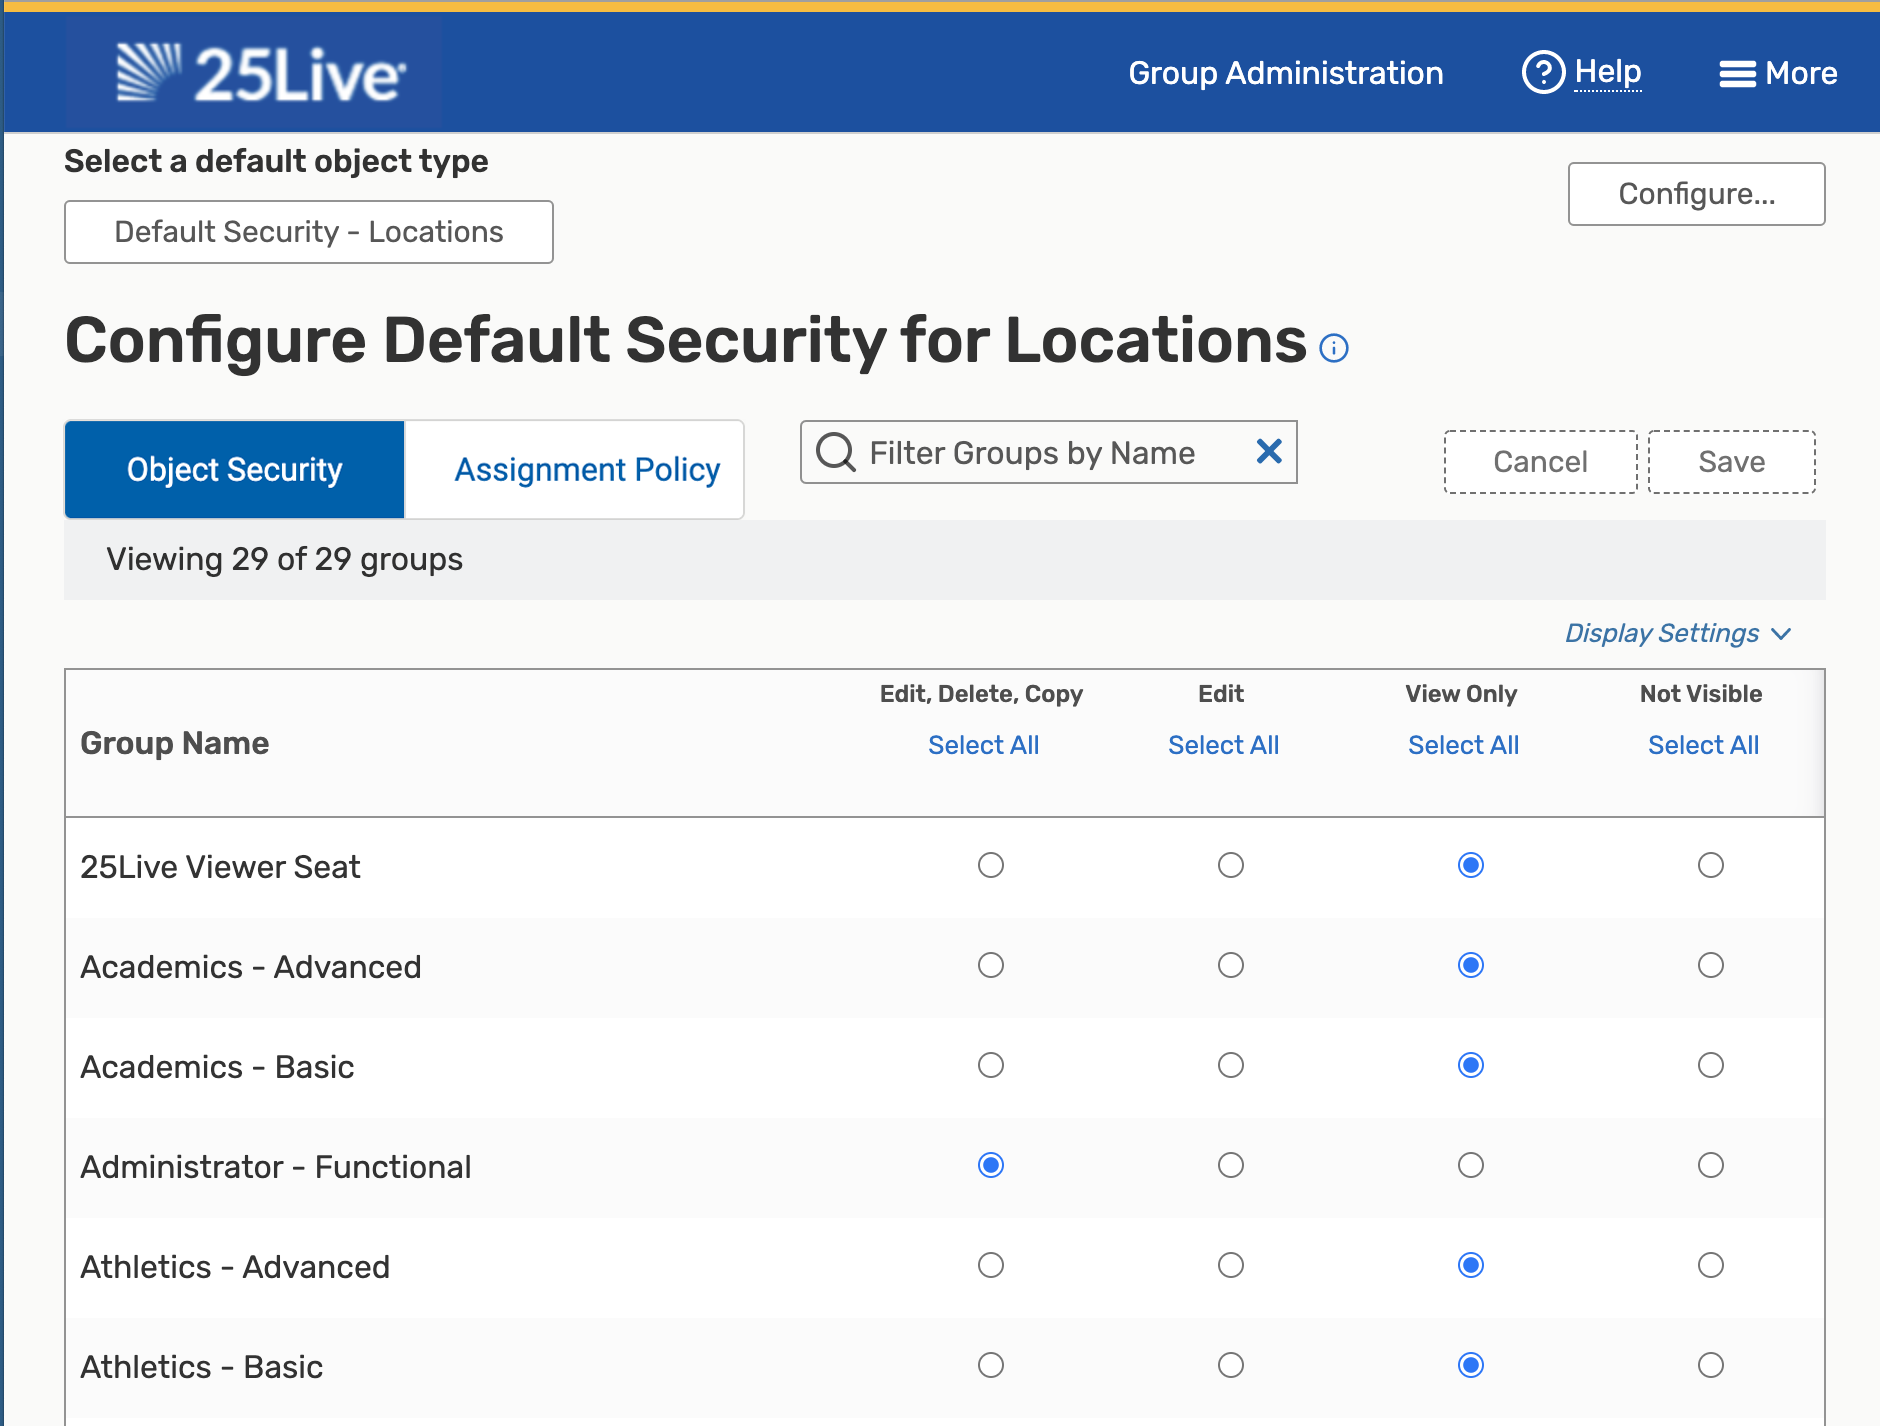 Setting default object security for locations.